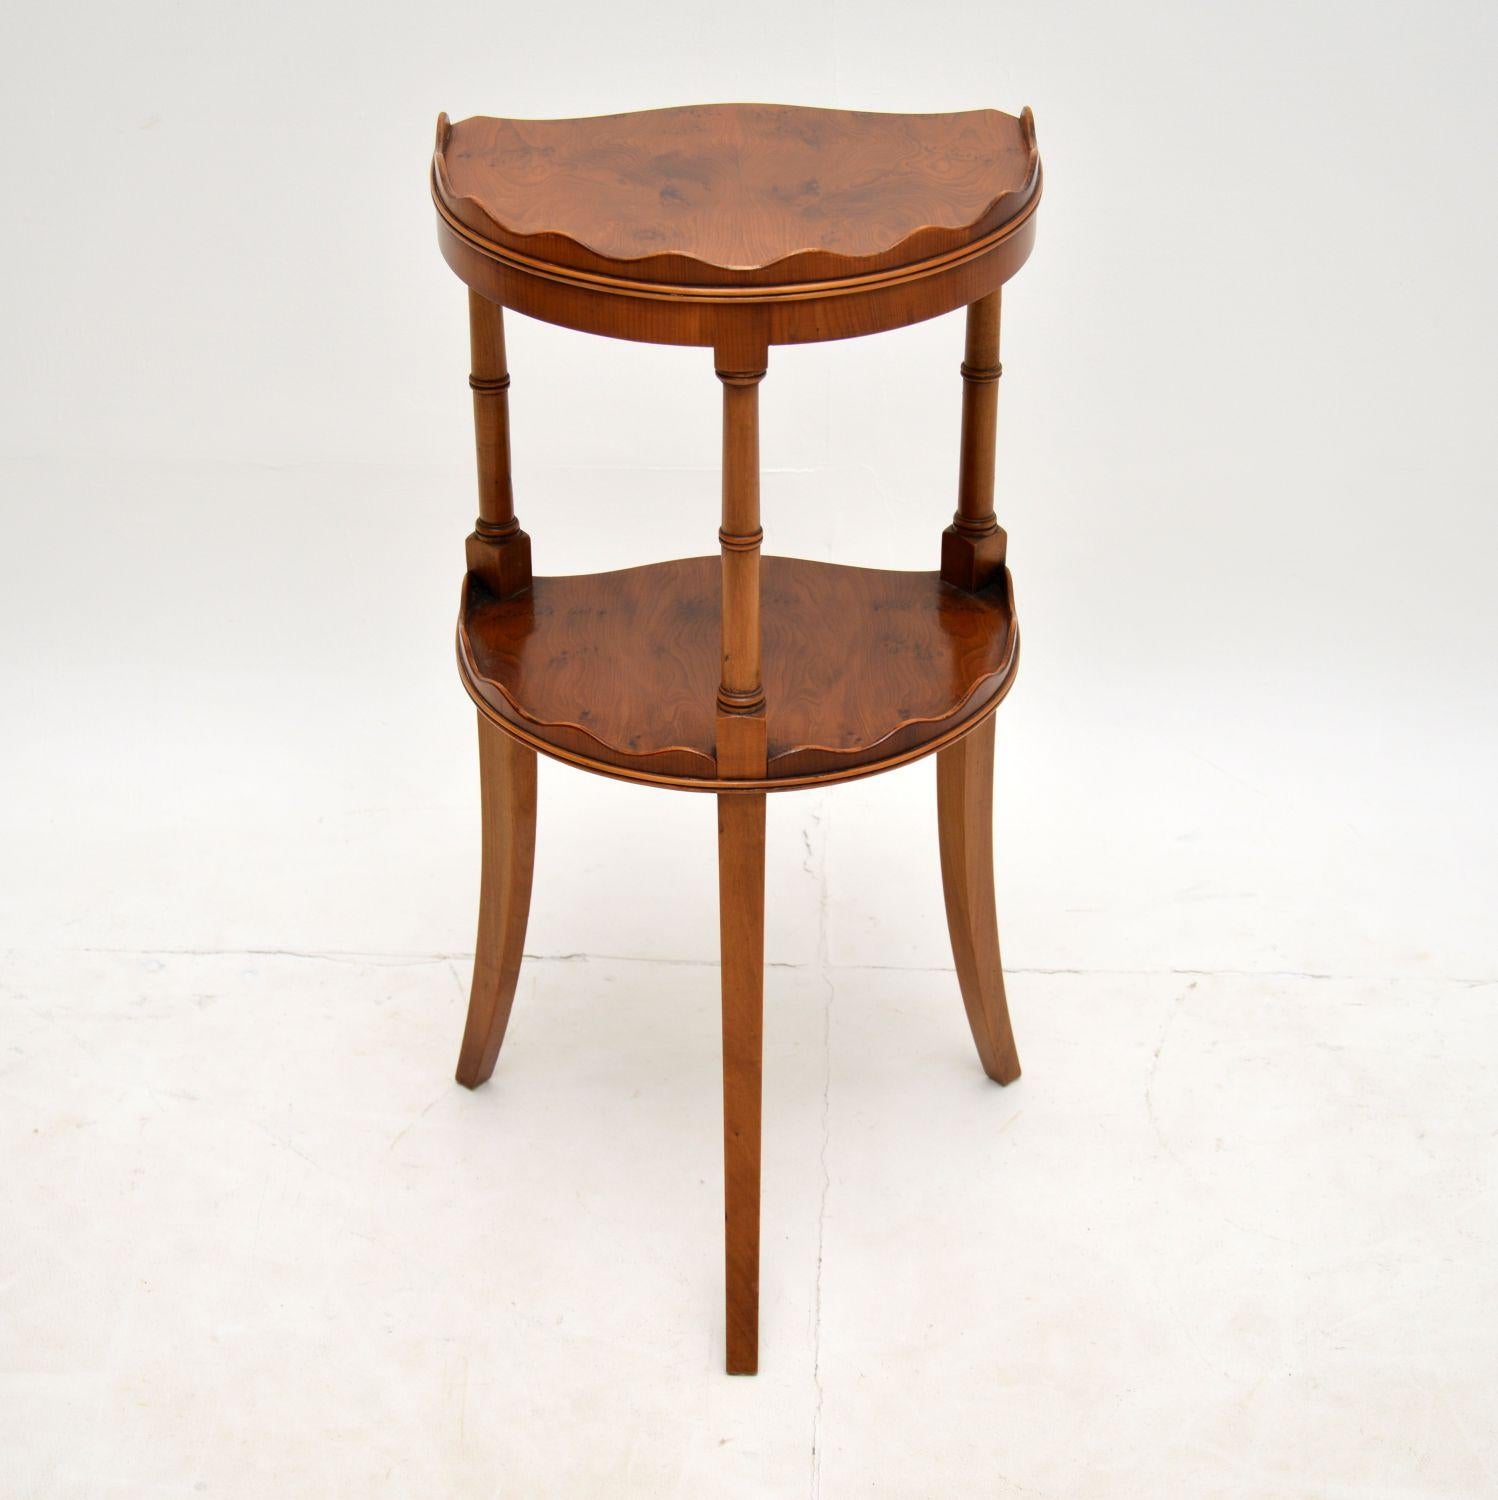 20th Century Antique Regency Style Yew Wood Side Table